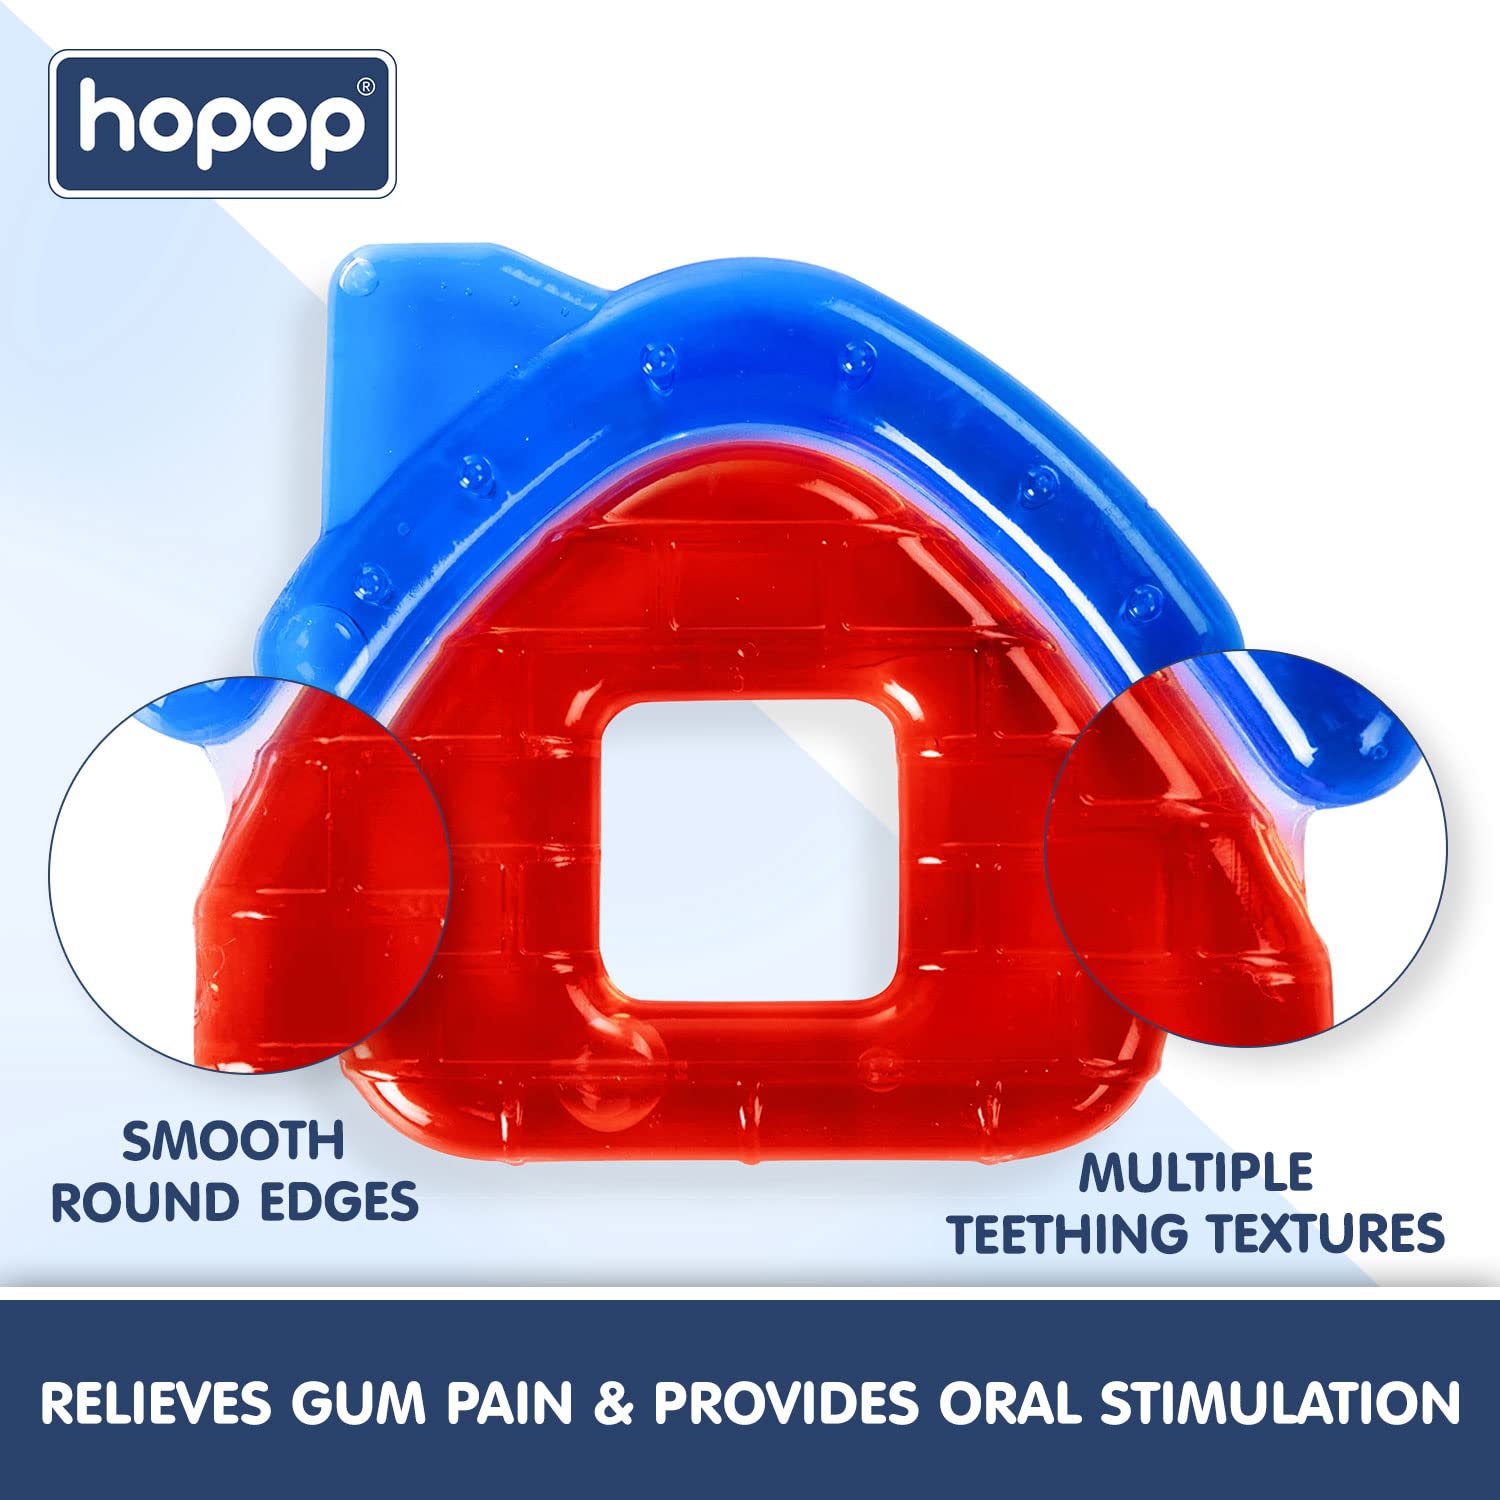 Hopop Easy Grip Water Filled Cooling Teether For Babies - House  4m+